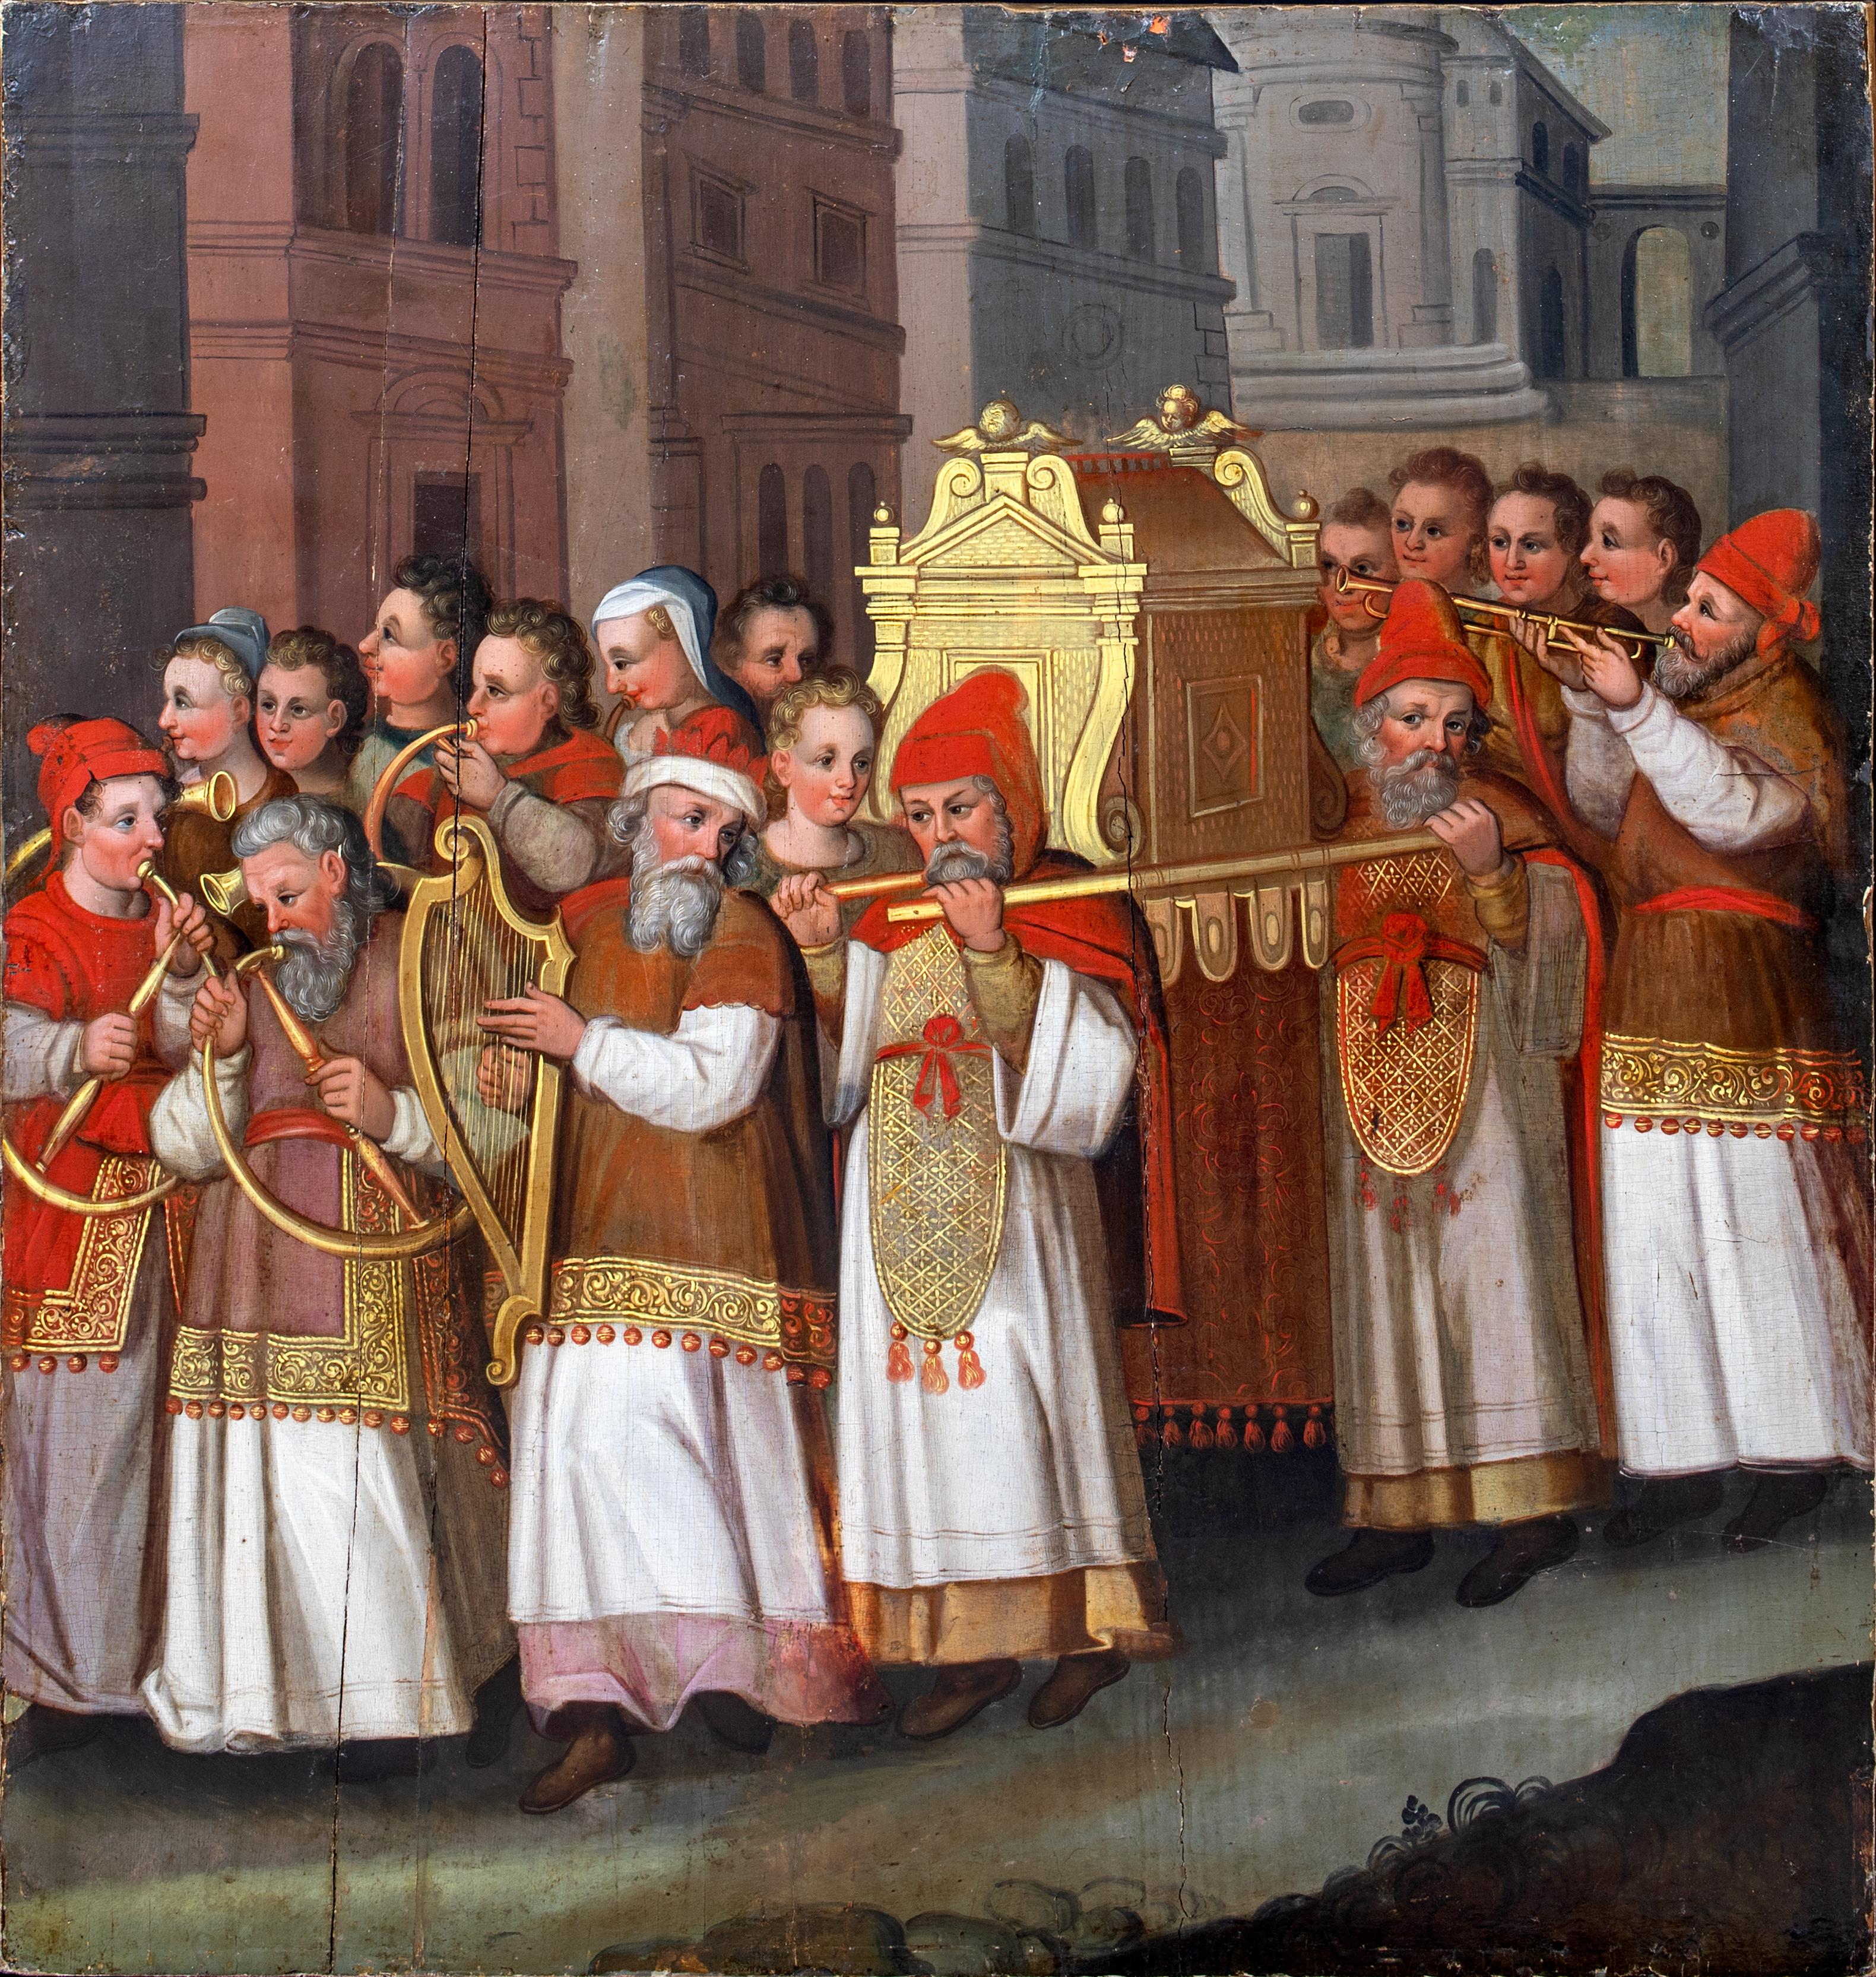 Unknown Figurative Painting - The Procession Of The Ark Of The Covenant, The Battle Of Jericho, 17th Century